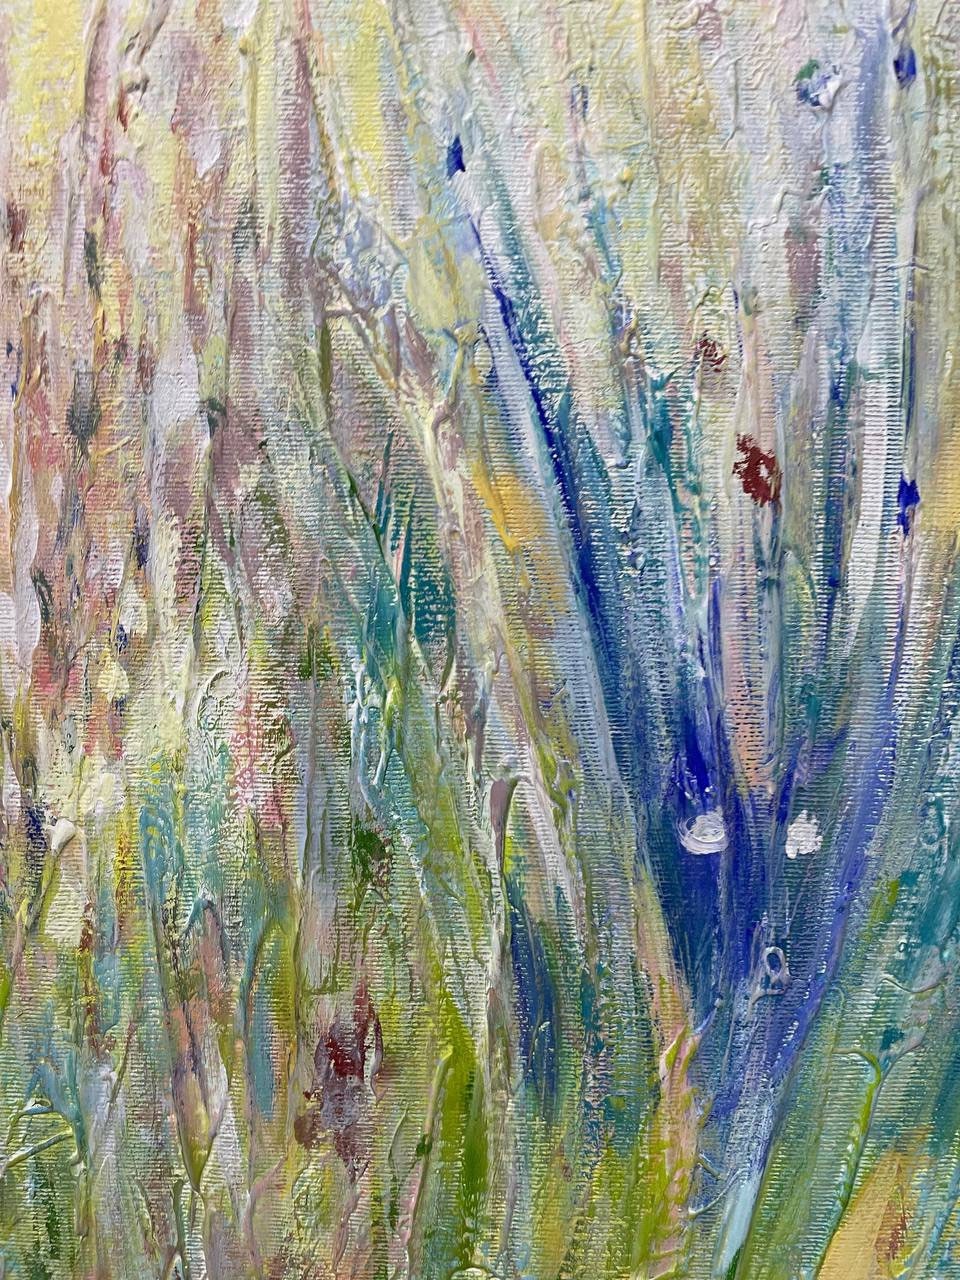 Blooming Garden Painting / Oversize Abstract Painting / Landscape Painting  / Large Original Abstract Art / Colorful Canvas Art / Nature Art 